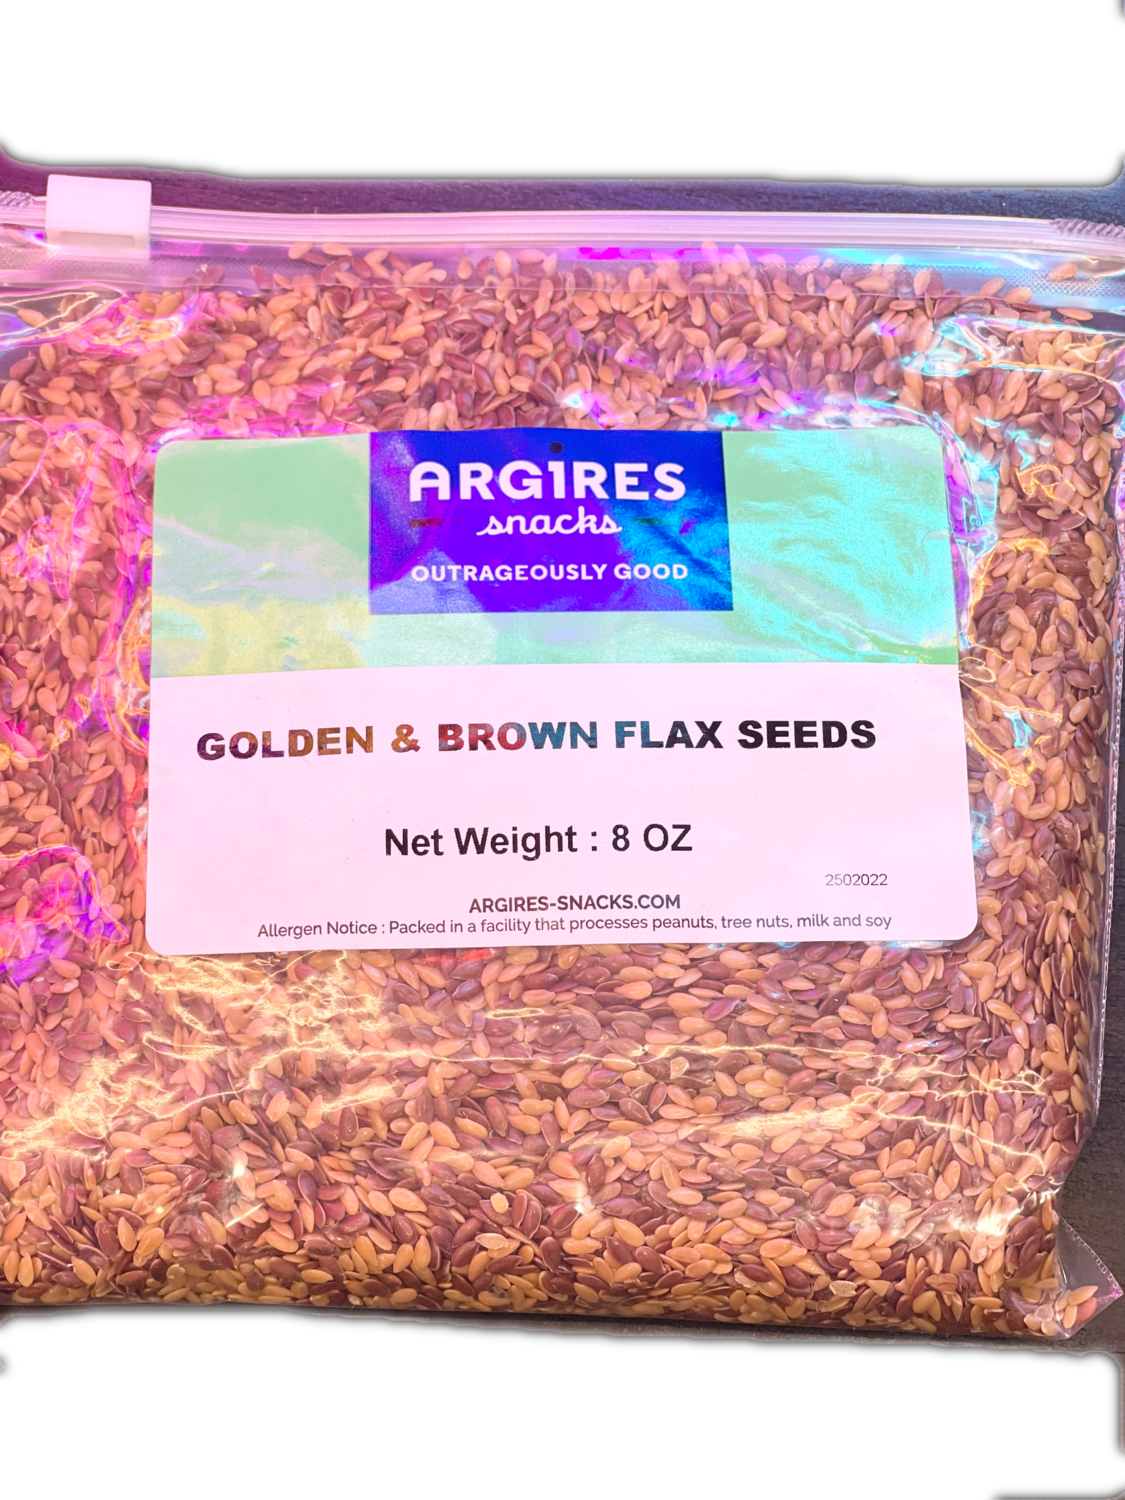 All Natural Golden & Brown Flax Seed Mix by Argires Snacks 8oz